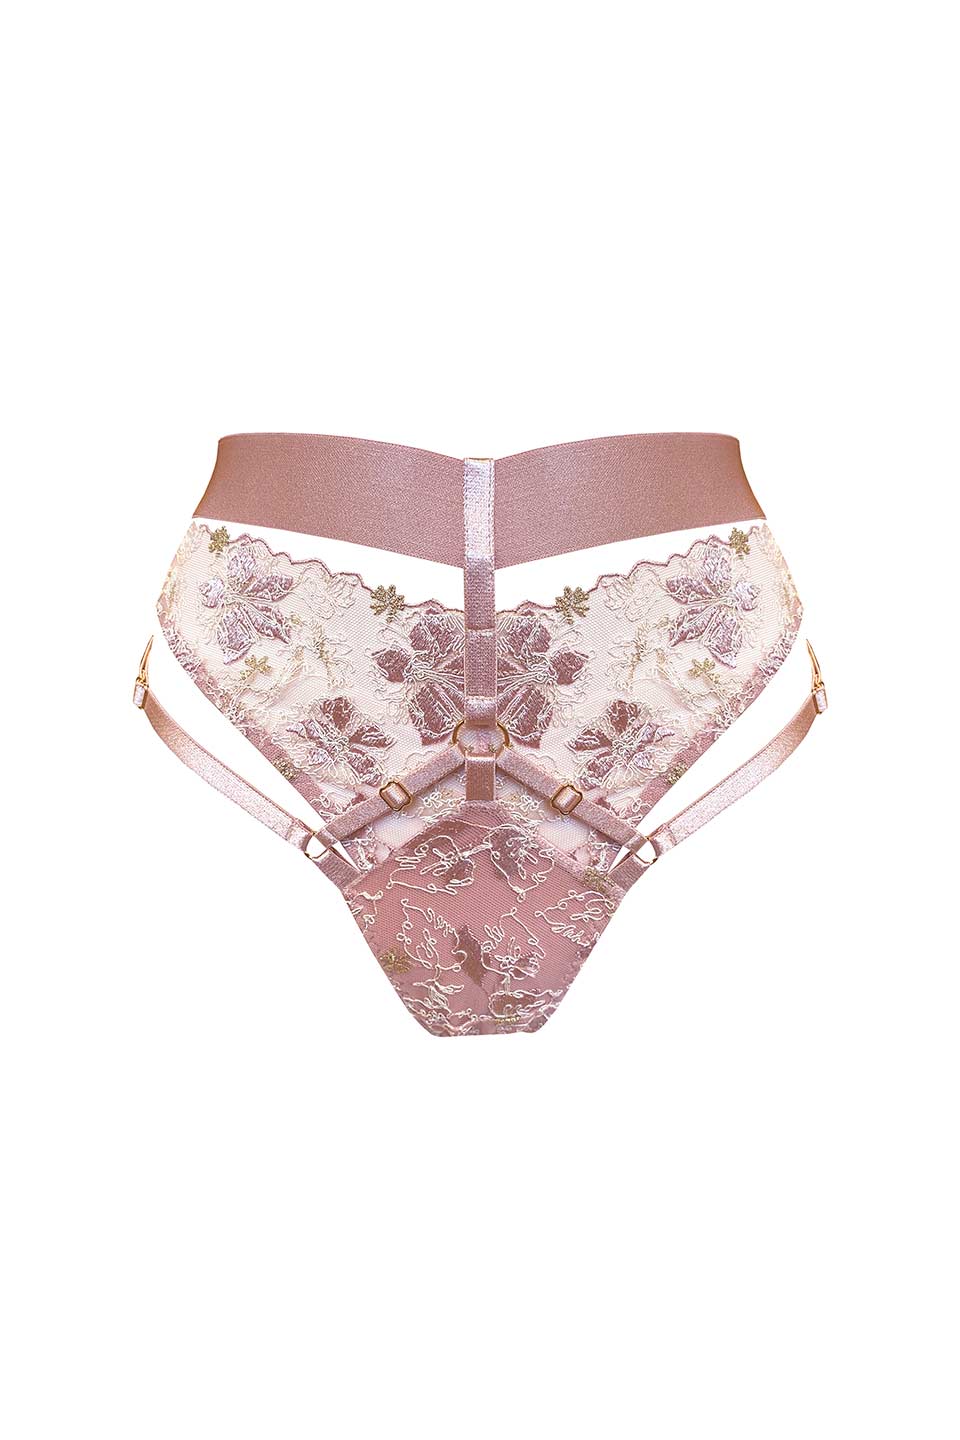 Shop online trendy Rose Undergarments from Bordelle Fashion designer. Product gallery 1